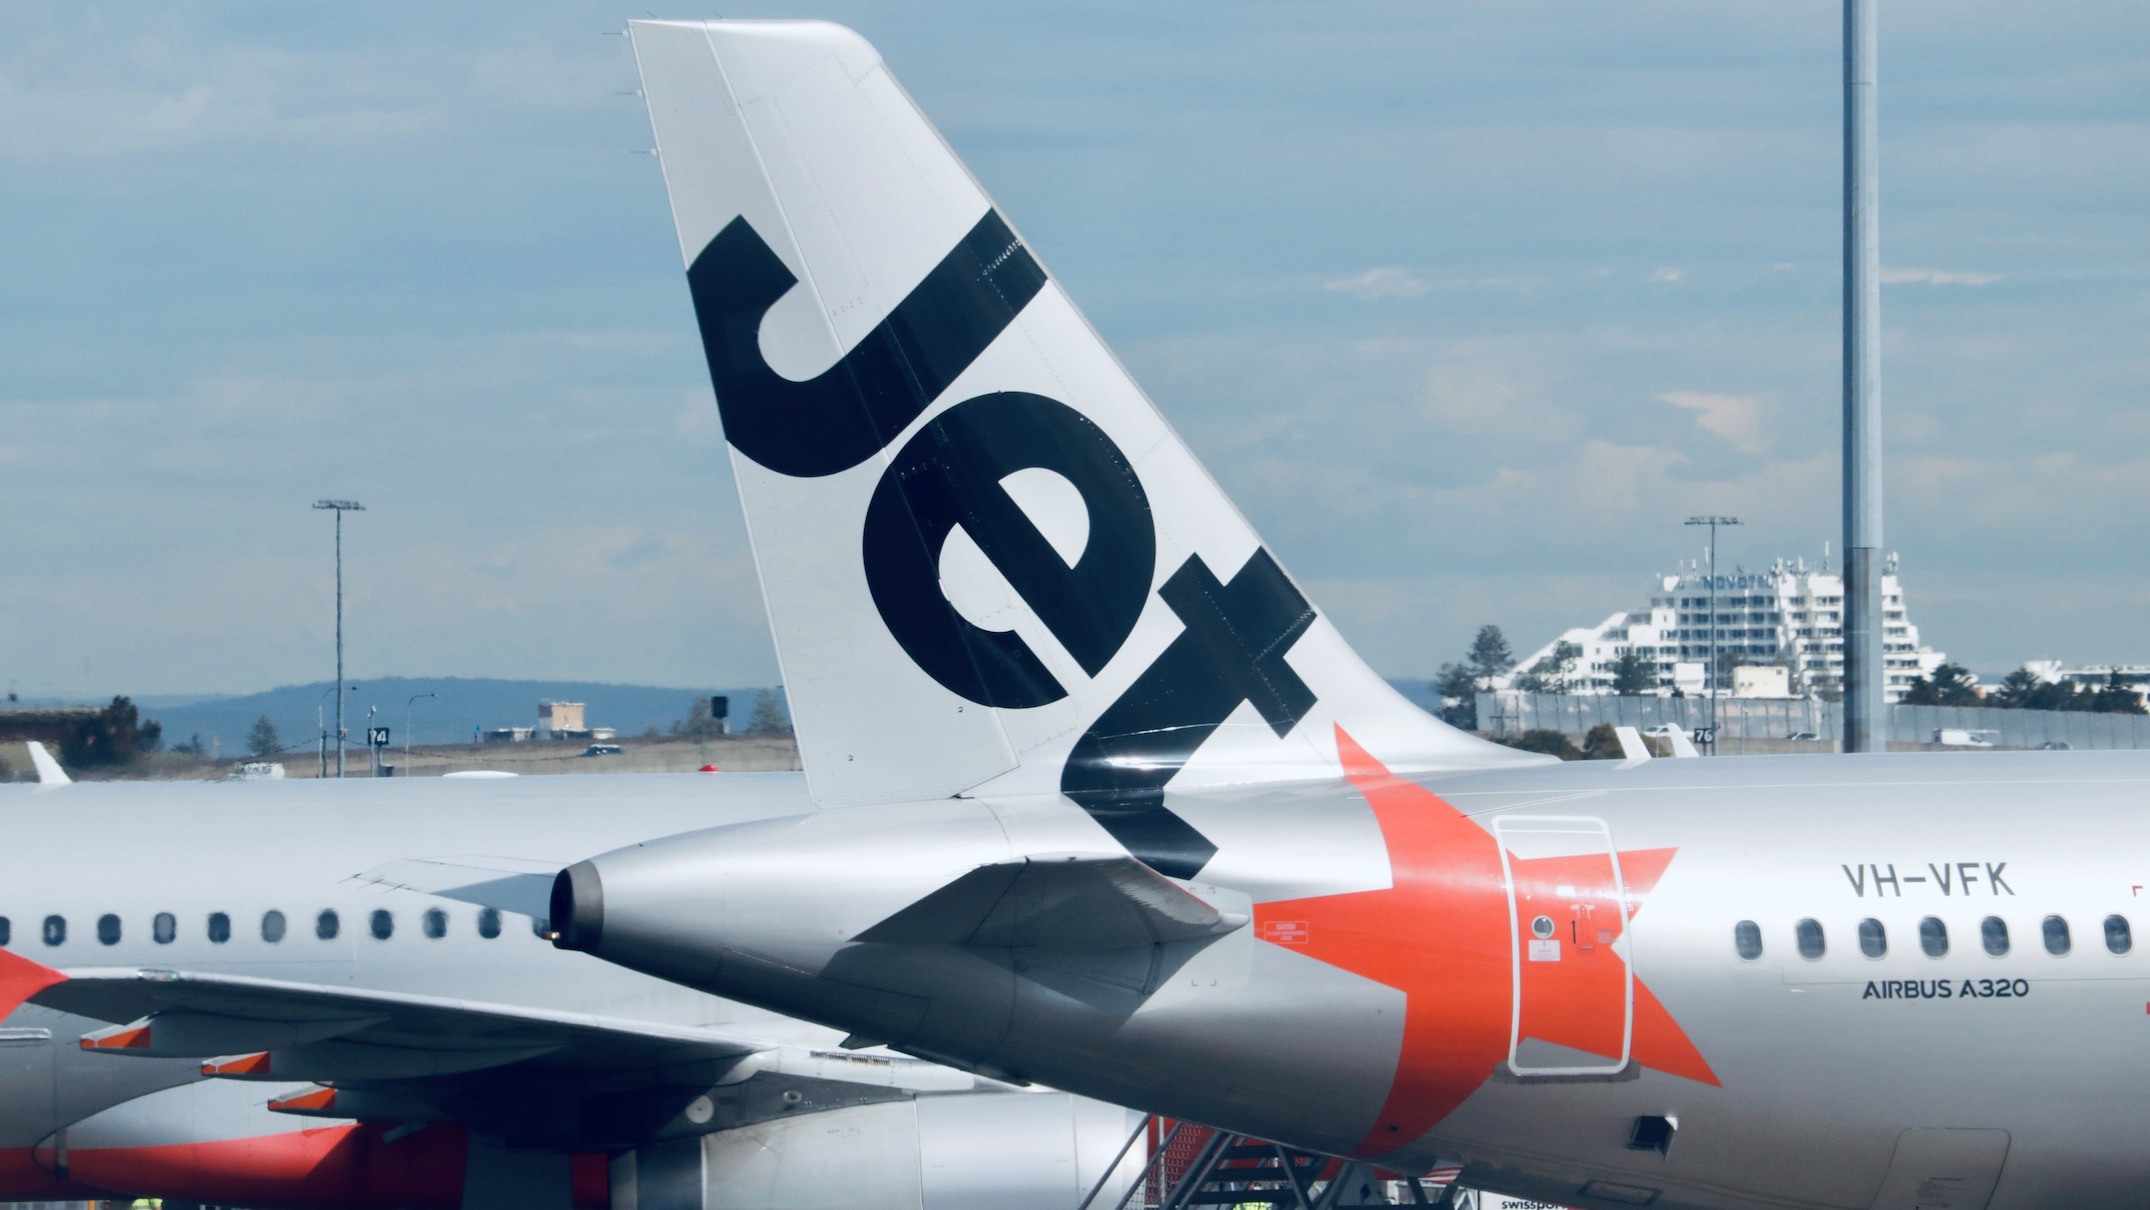 jetstar asia announces direct flights from broome to singapore, promises low airfares